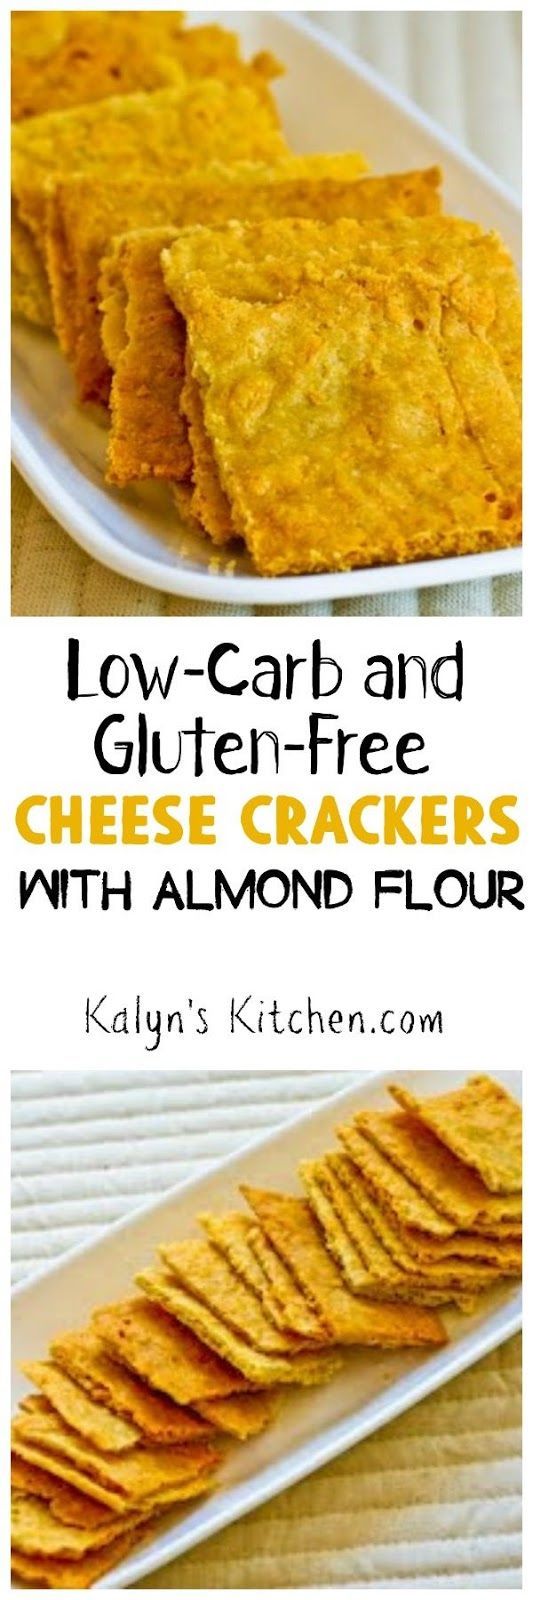 Low-Carb and Gluten-Free Cheese Crackers with Almond Flour found on KalynsKitchen.com